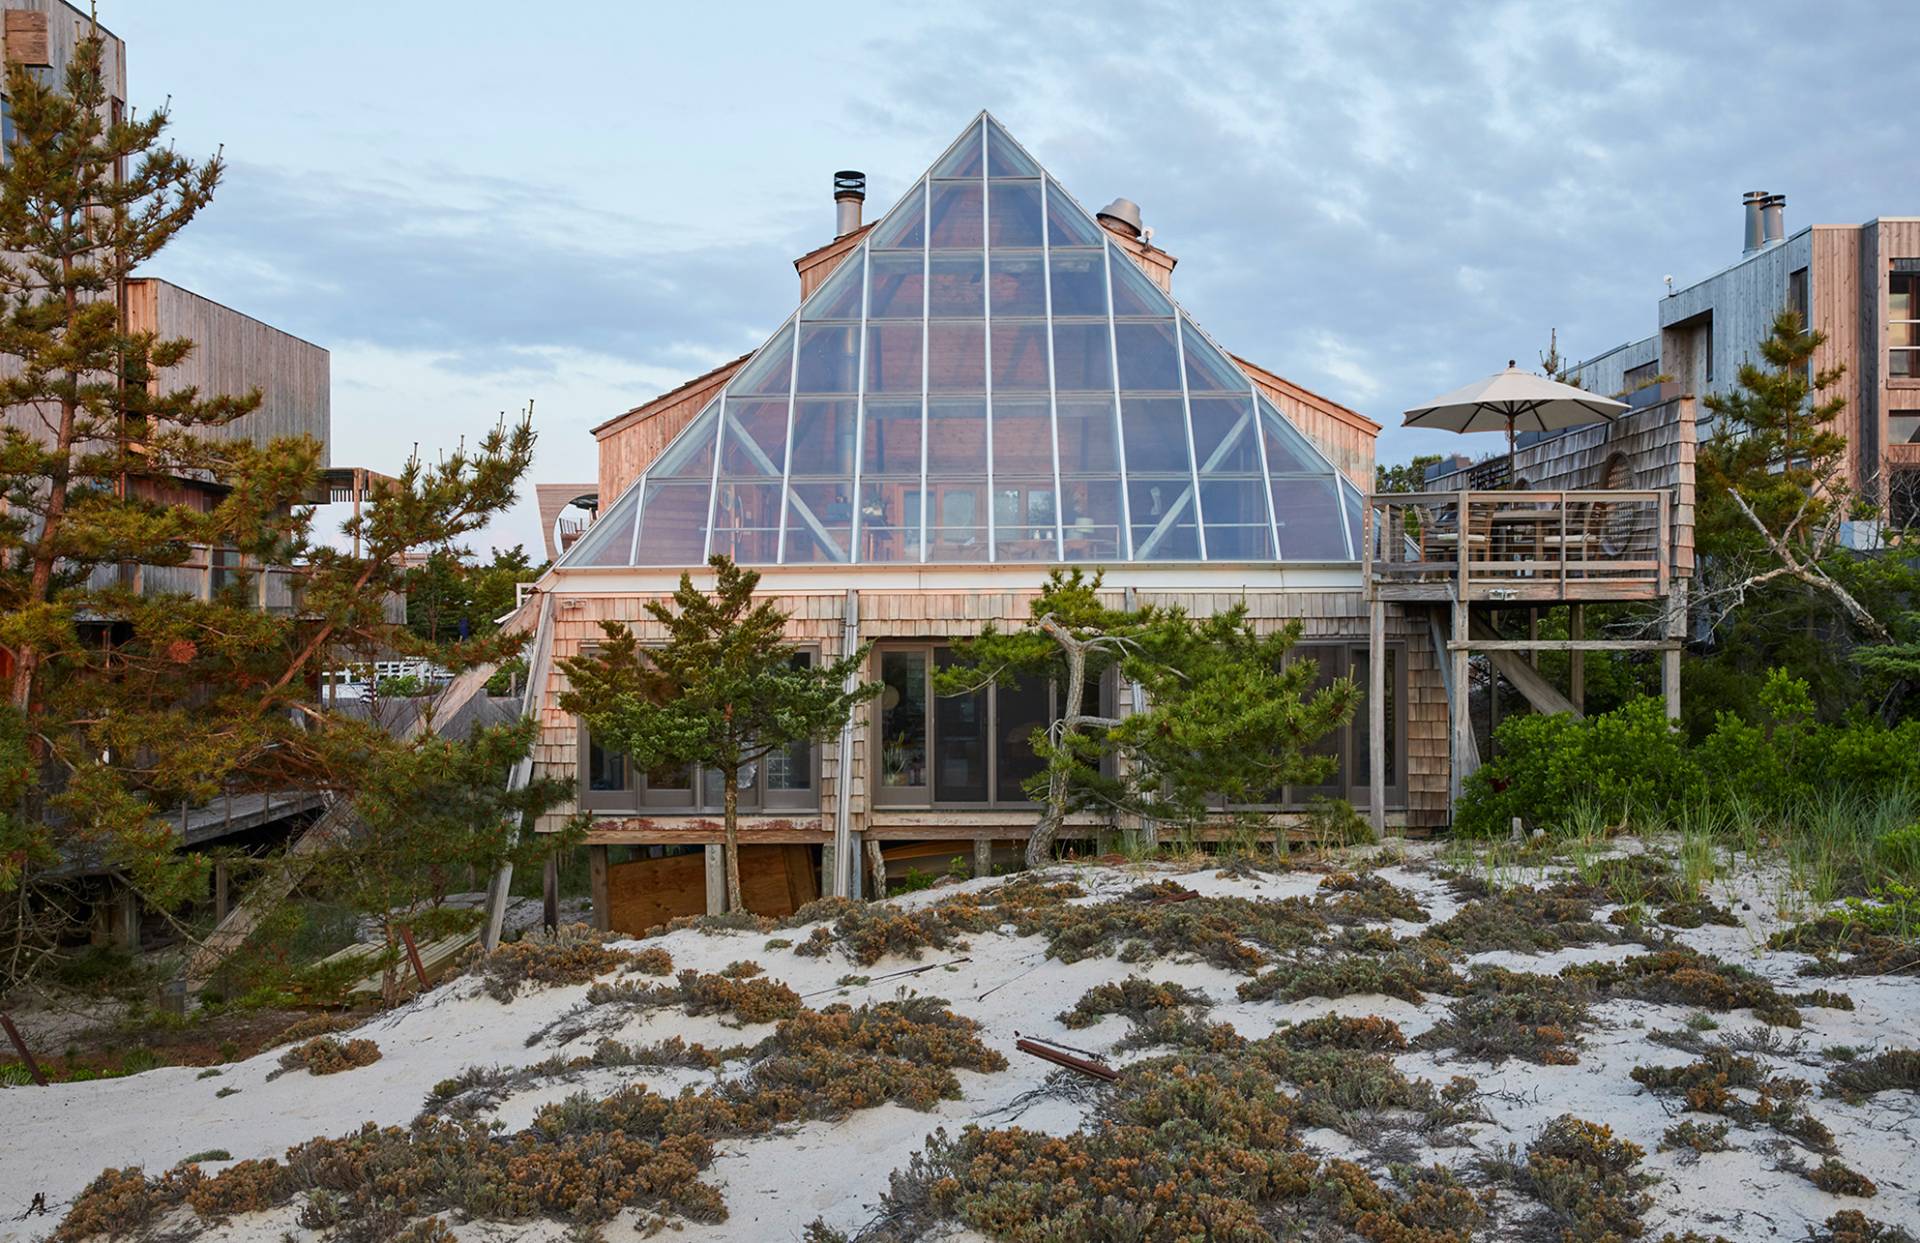 Property for Sale at 443 Sail Walk, Fire Island Pines, Fire Island, NY - Bedrooms: 3 
Bathrooms: 2.5  - $4,250,000